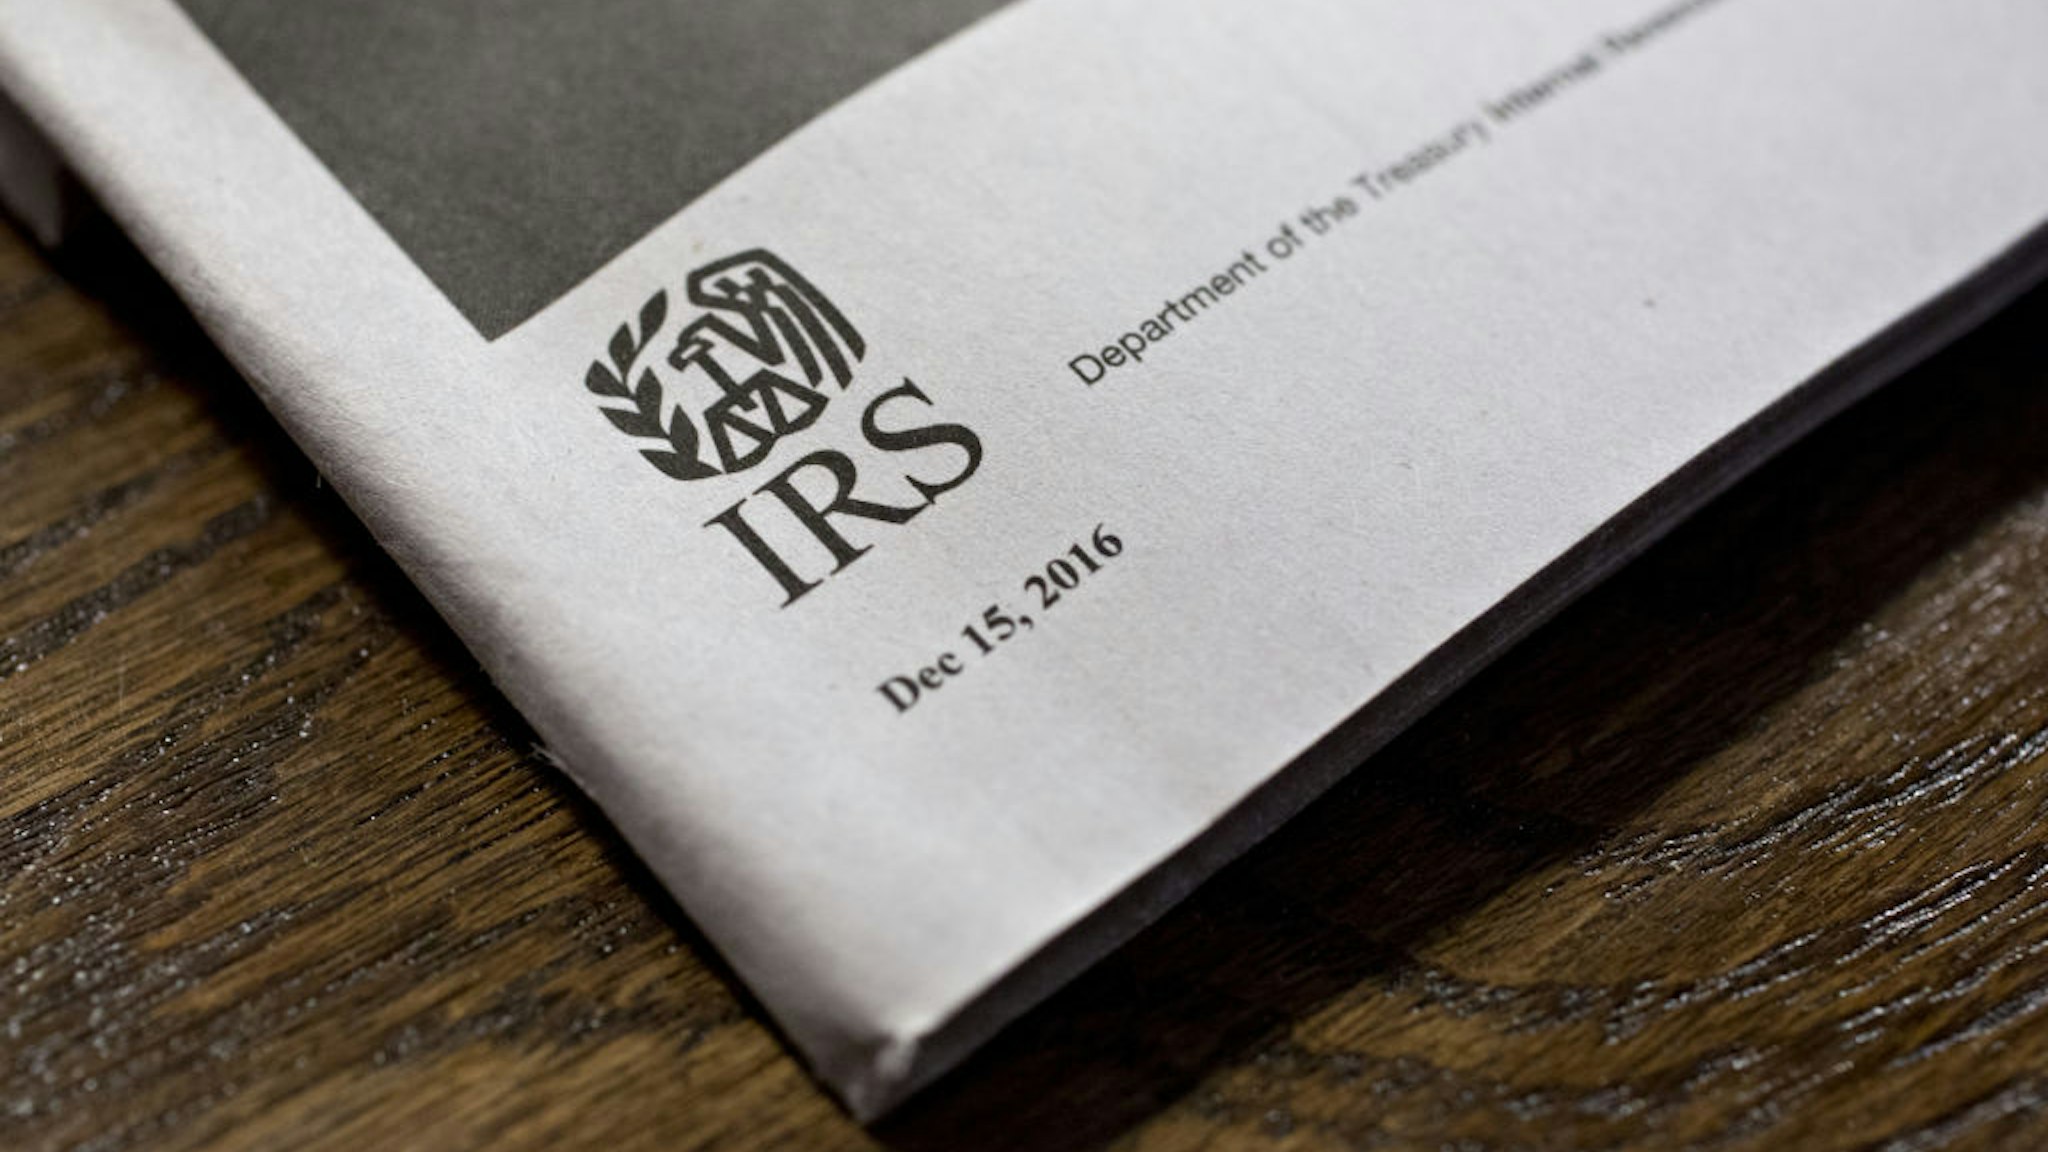 A U.S. Department of the Treasury Internal Revenue Service (IRS) logo is seen on an instruction book for a 1040 Individual Income Tax forms in Tiskilwa, Illinois, U.S., on Tuesday, March 28, 2017. Due to the Emancipation day holiday, this year's income taxes will need to be filed by April 18 instead of April 15. Photographer: Daniel Acker/Bloomberg via Getty Images